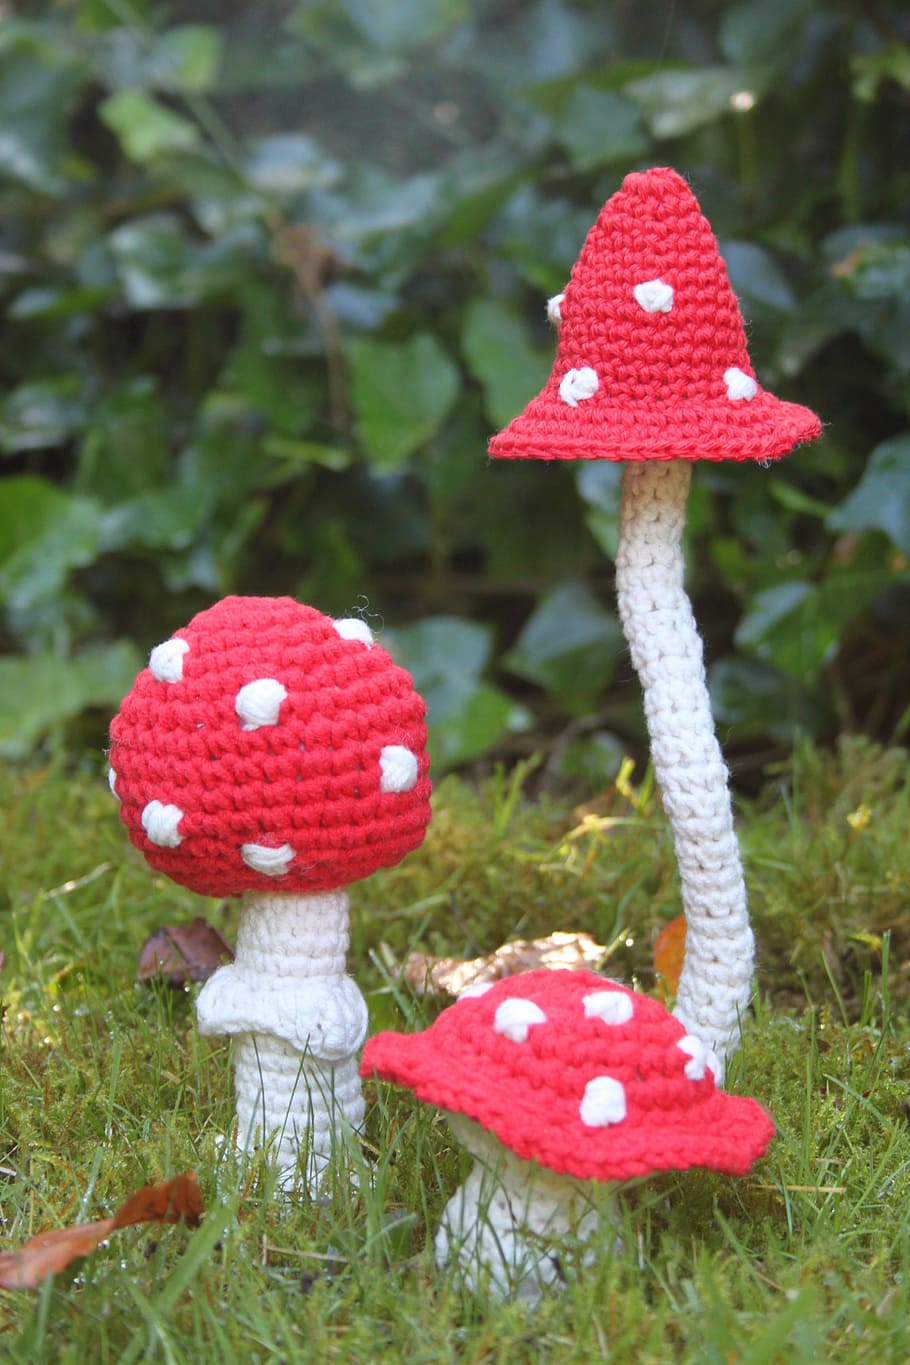 red, white, knitted, mushrooms, mushroom hooks, autumn, fly agaric, hooking, red with white dots, forest